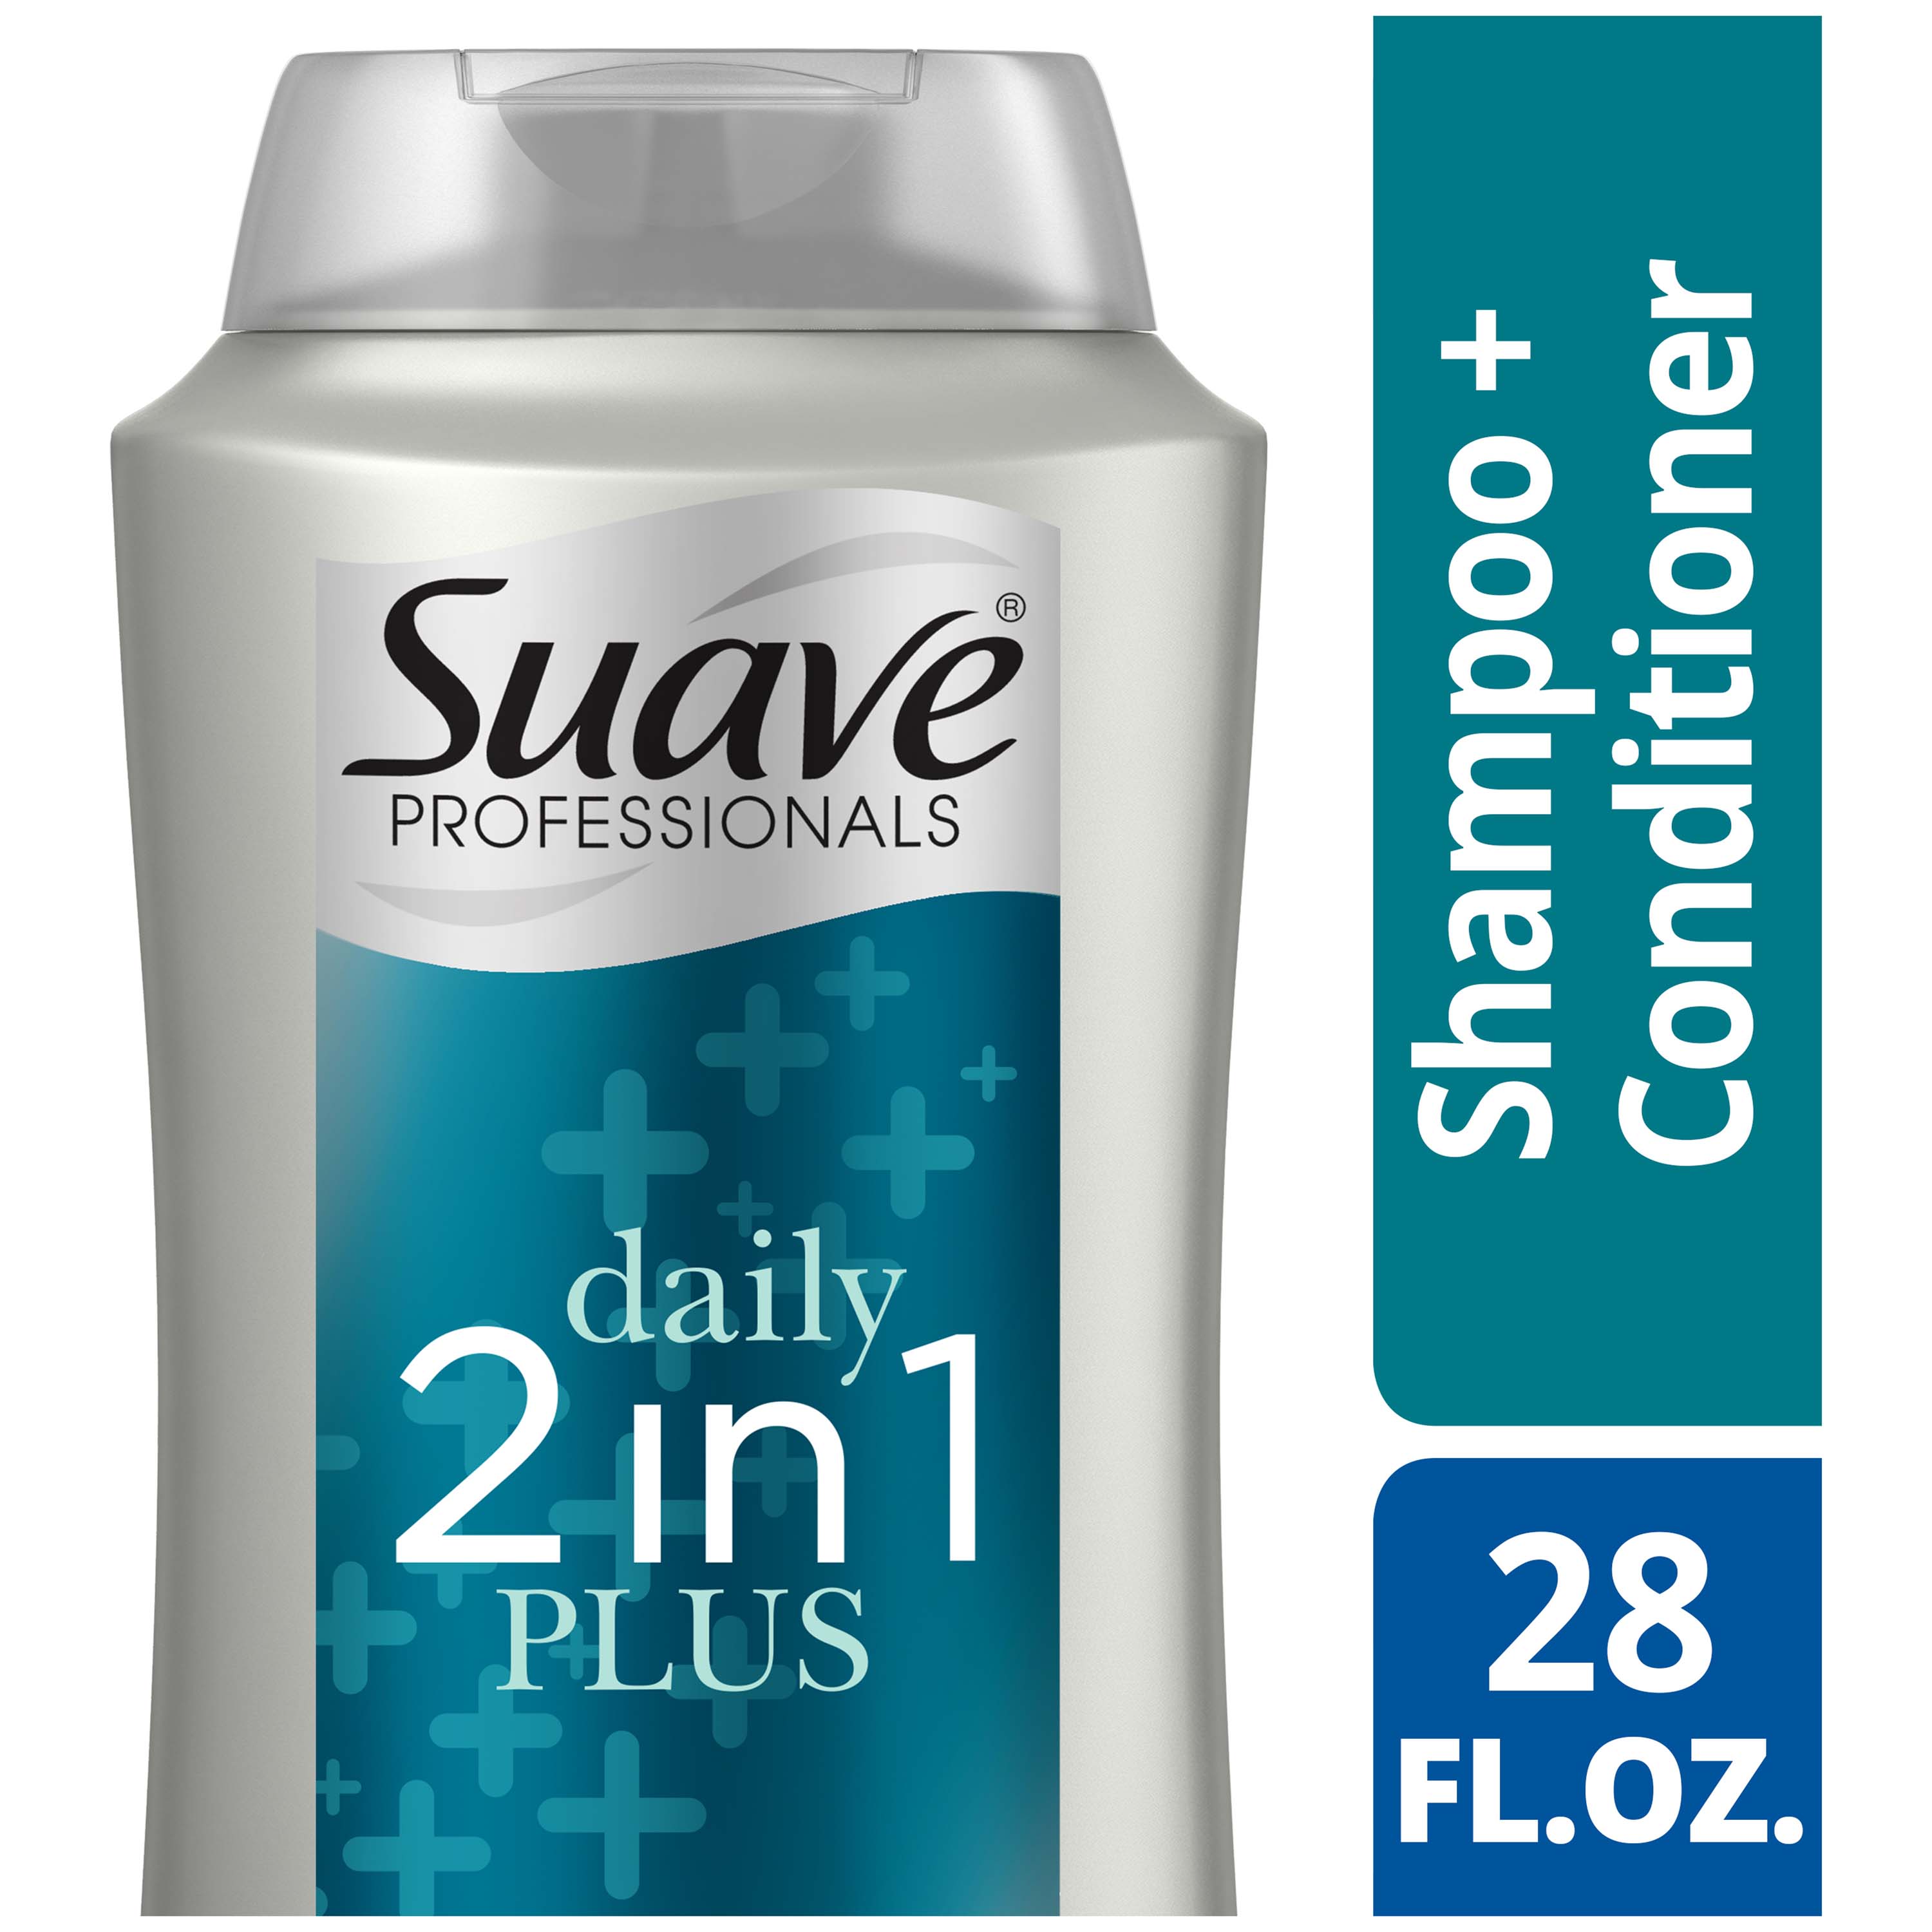 Suave Professionals Clarifying Moisturizing Daily Plus 2 in 1 Shampoo and Conditioner, 28 fl oz - image 3 of 10